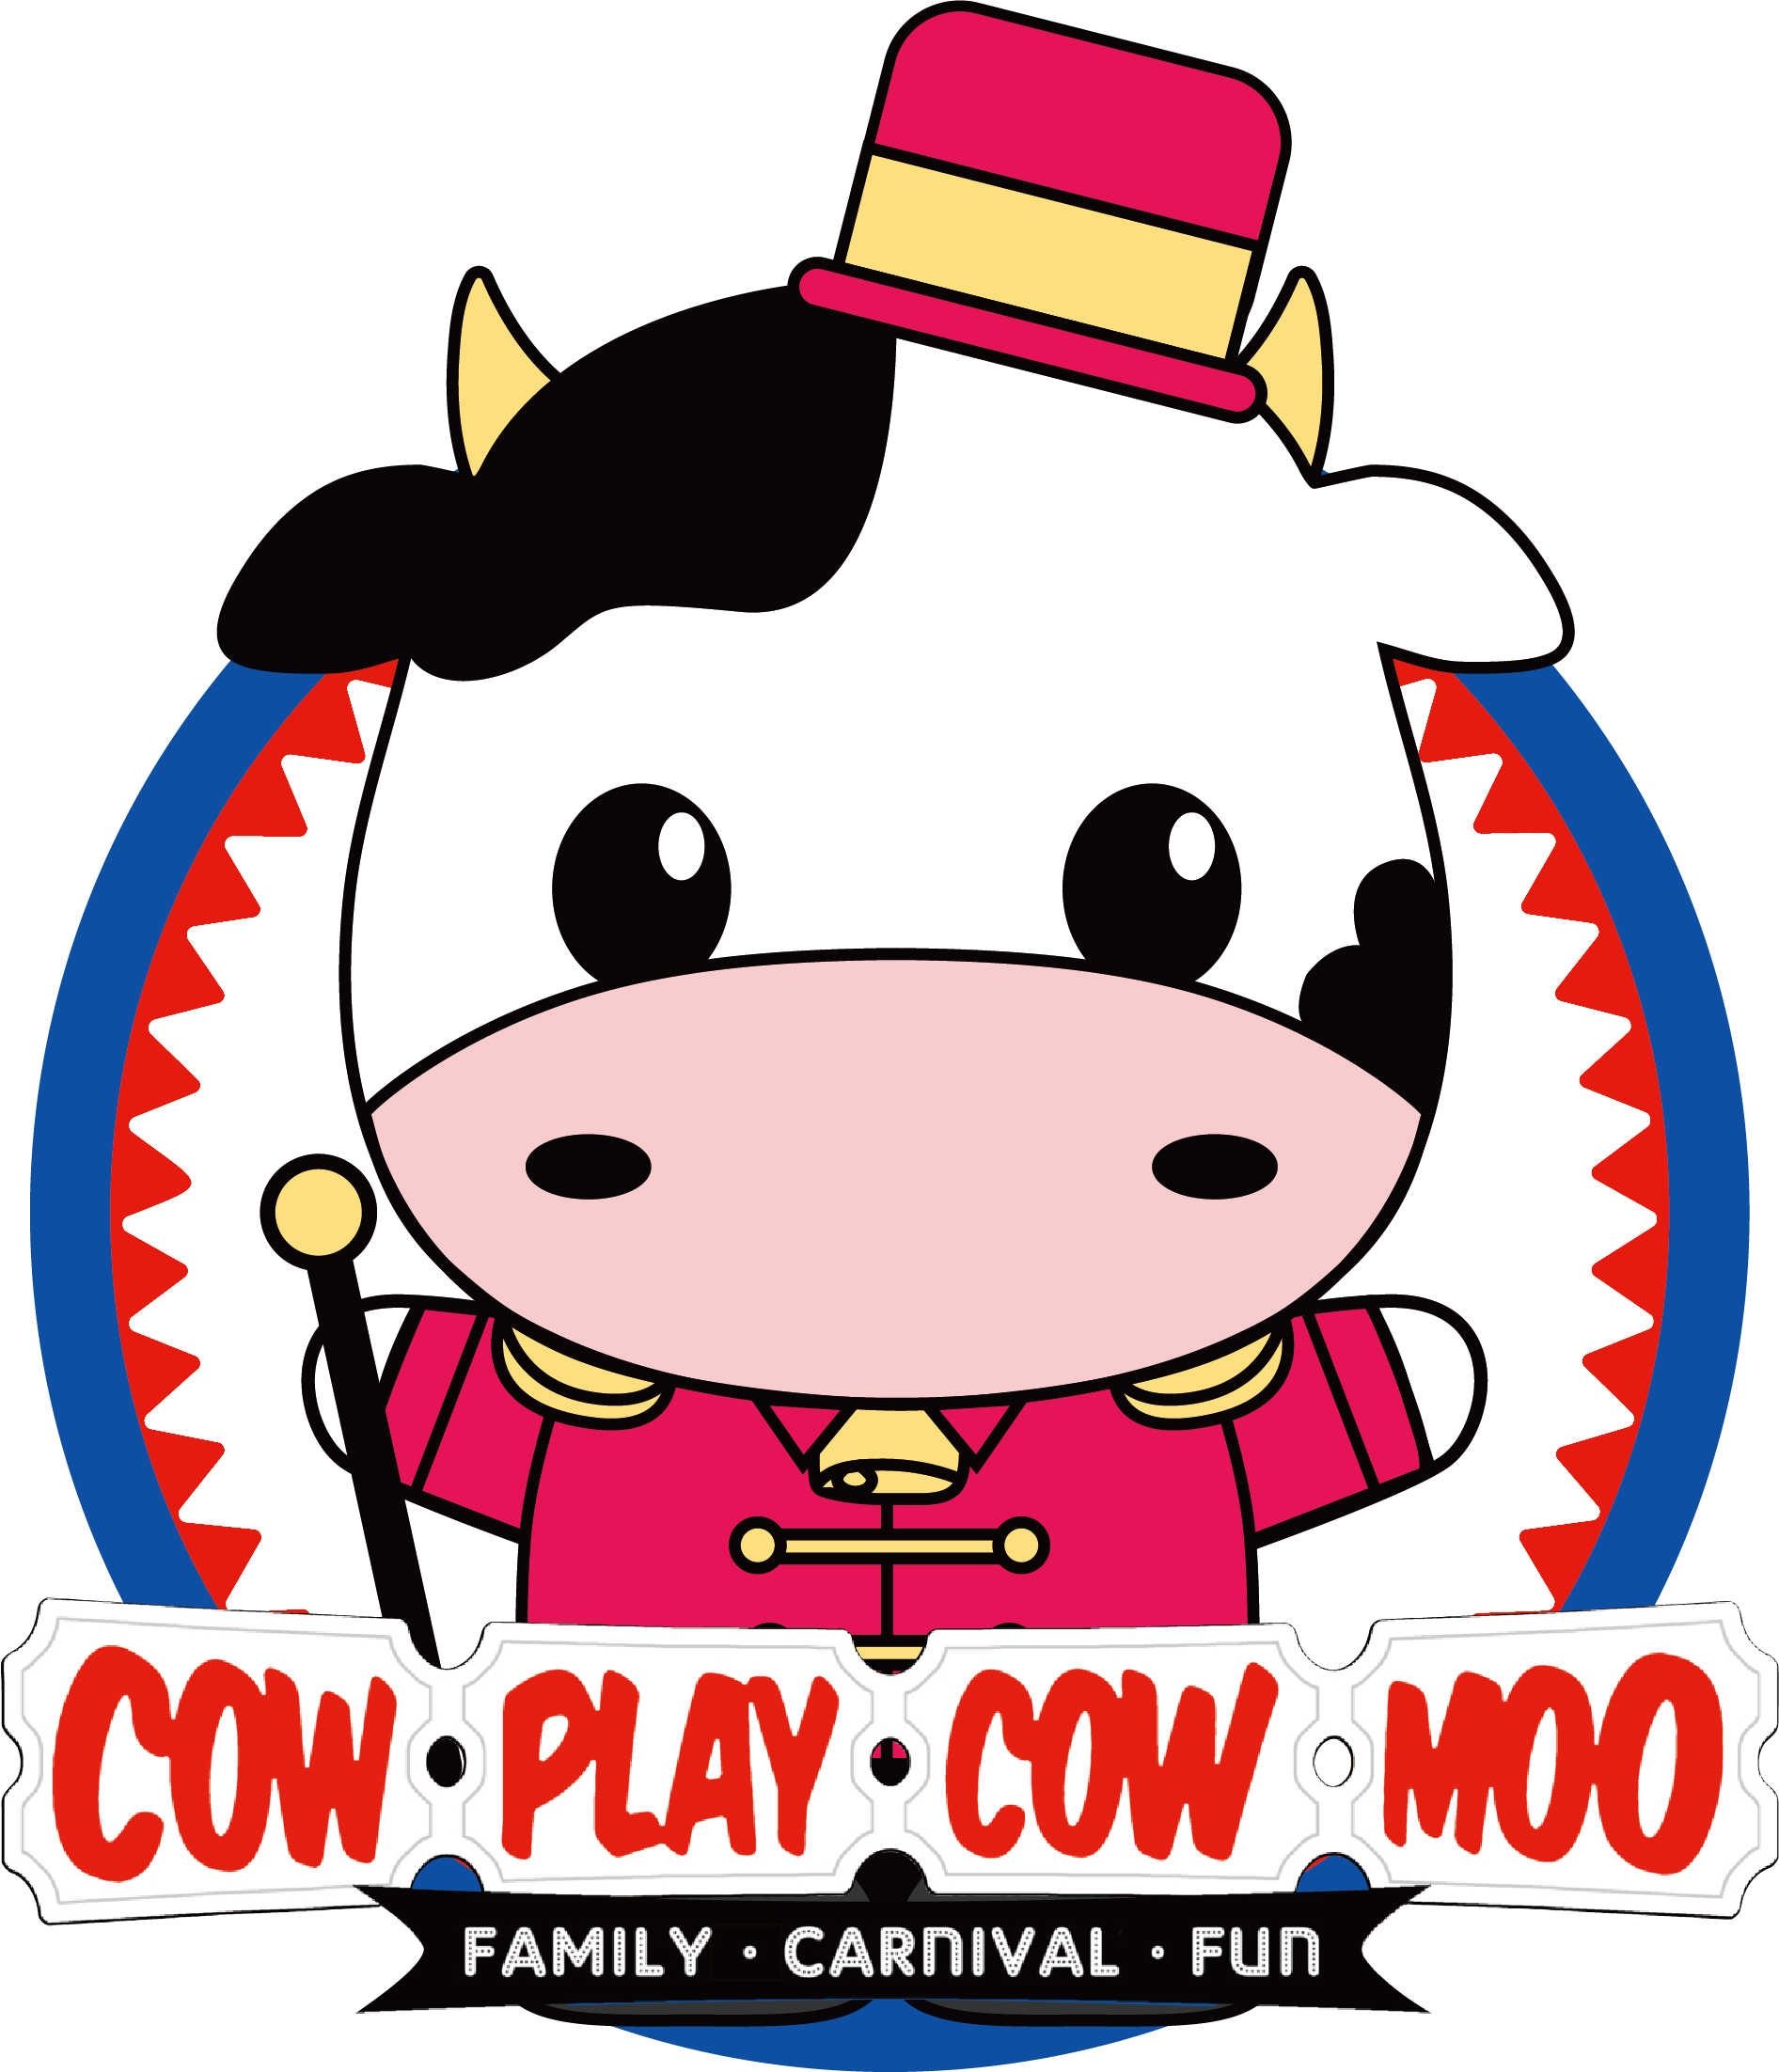 Cow Play Cow Moo LOGO - Copy.png